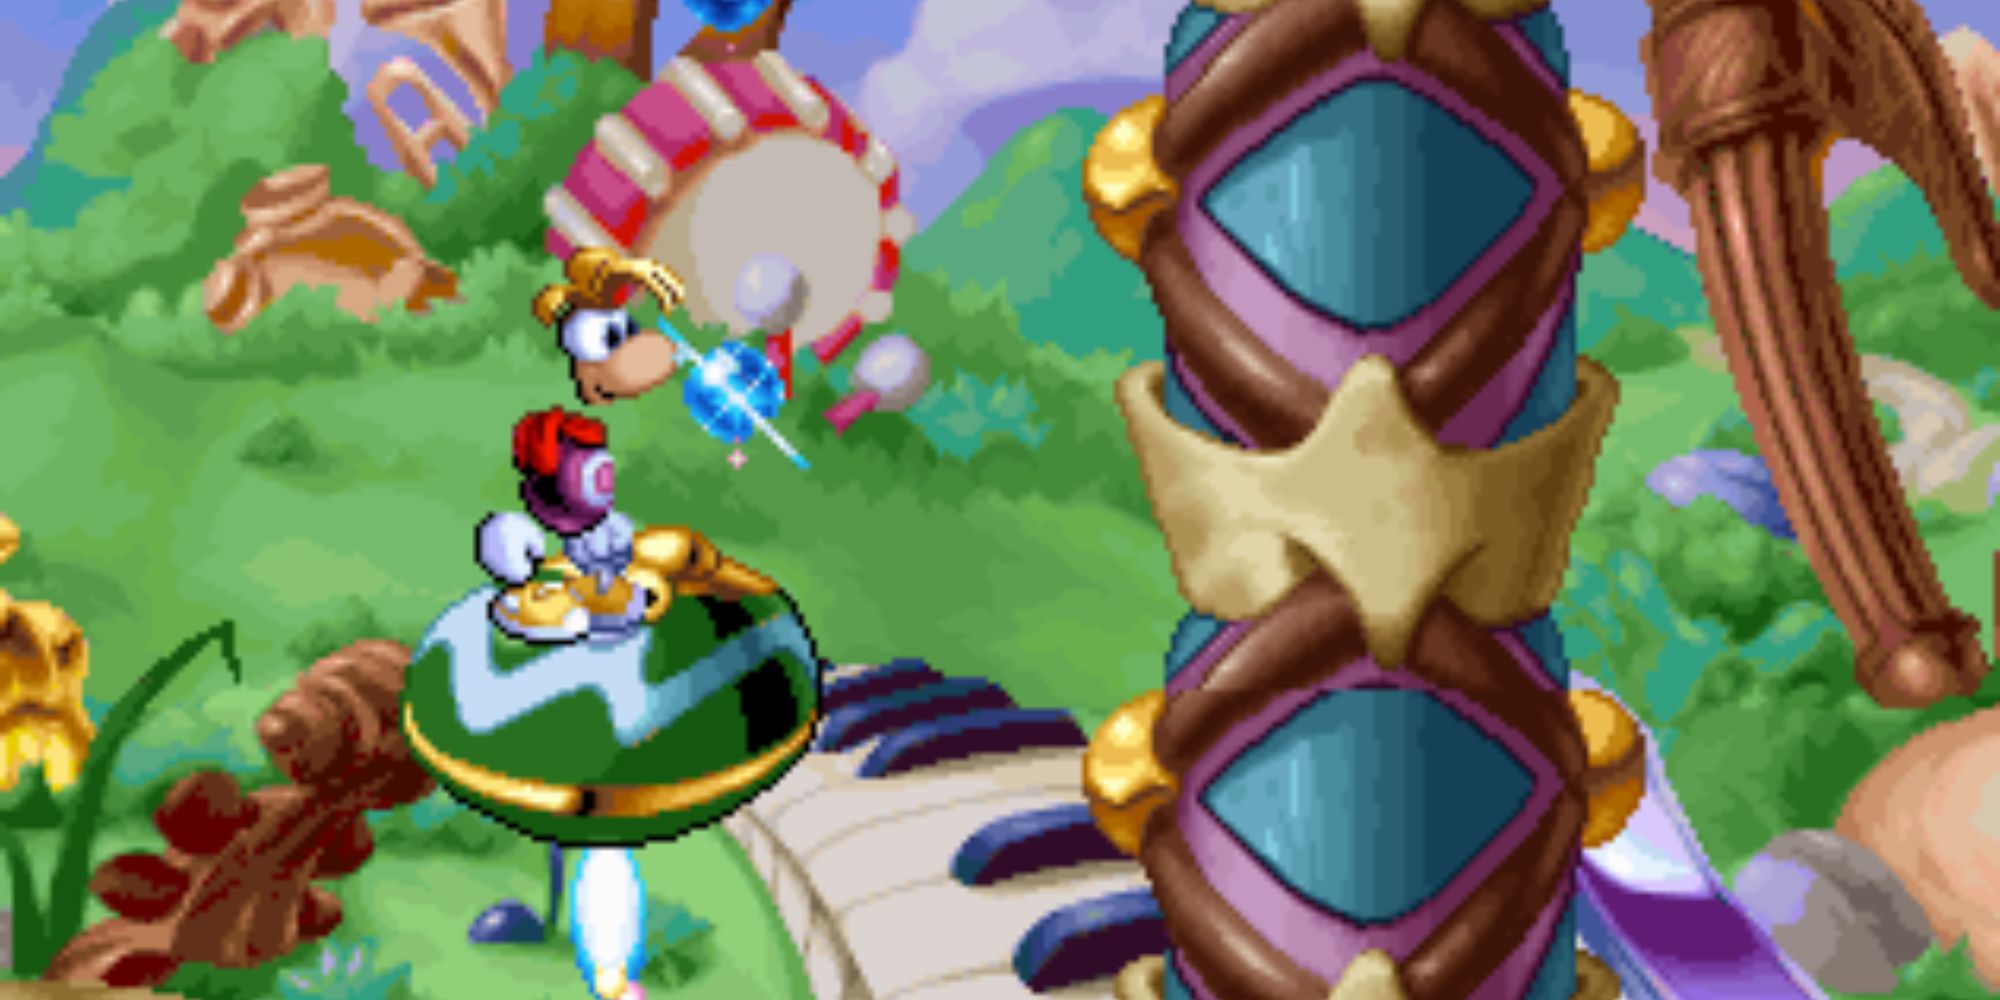 Rayman on a castanet platform in Band Land